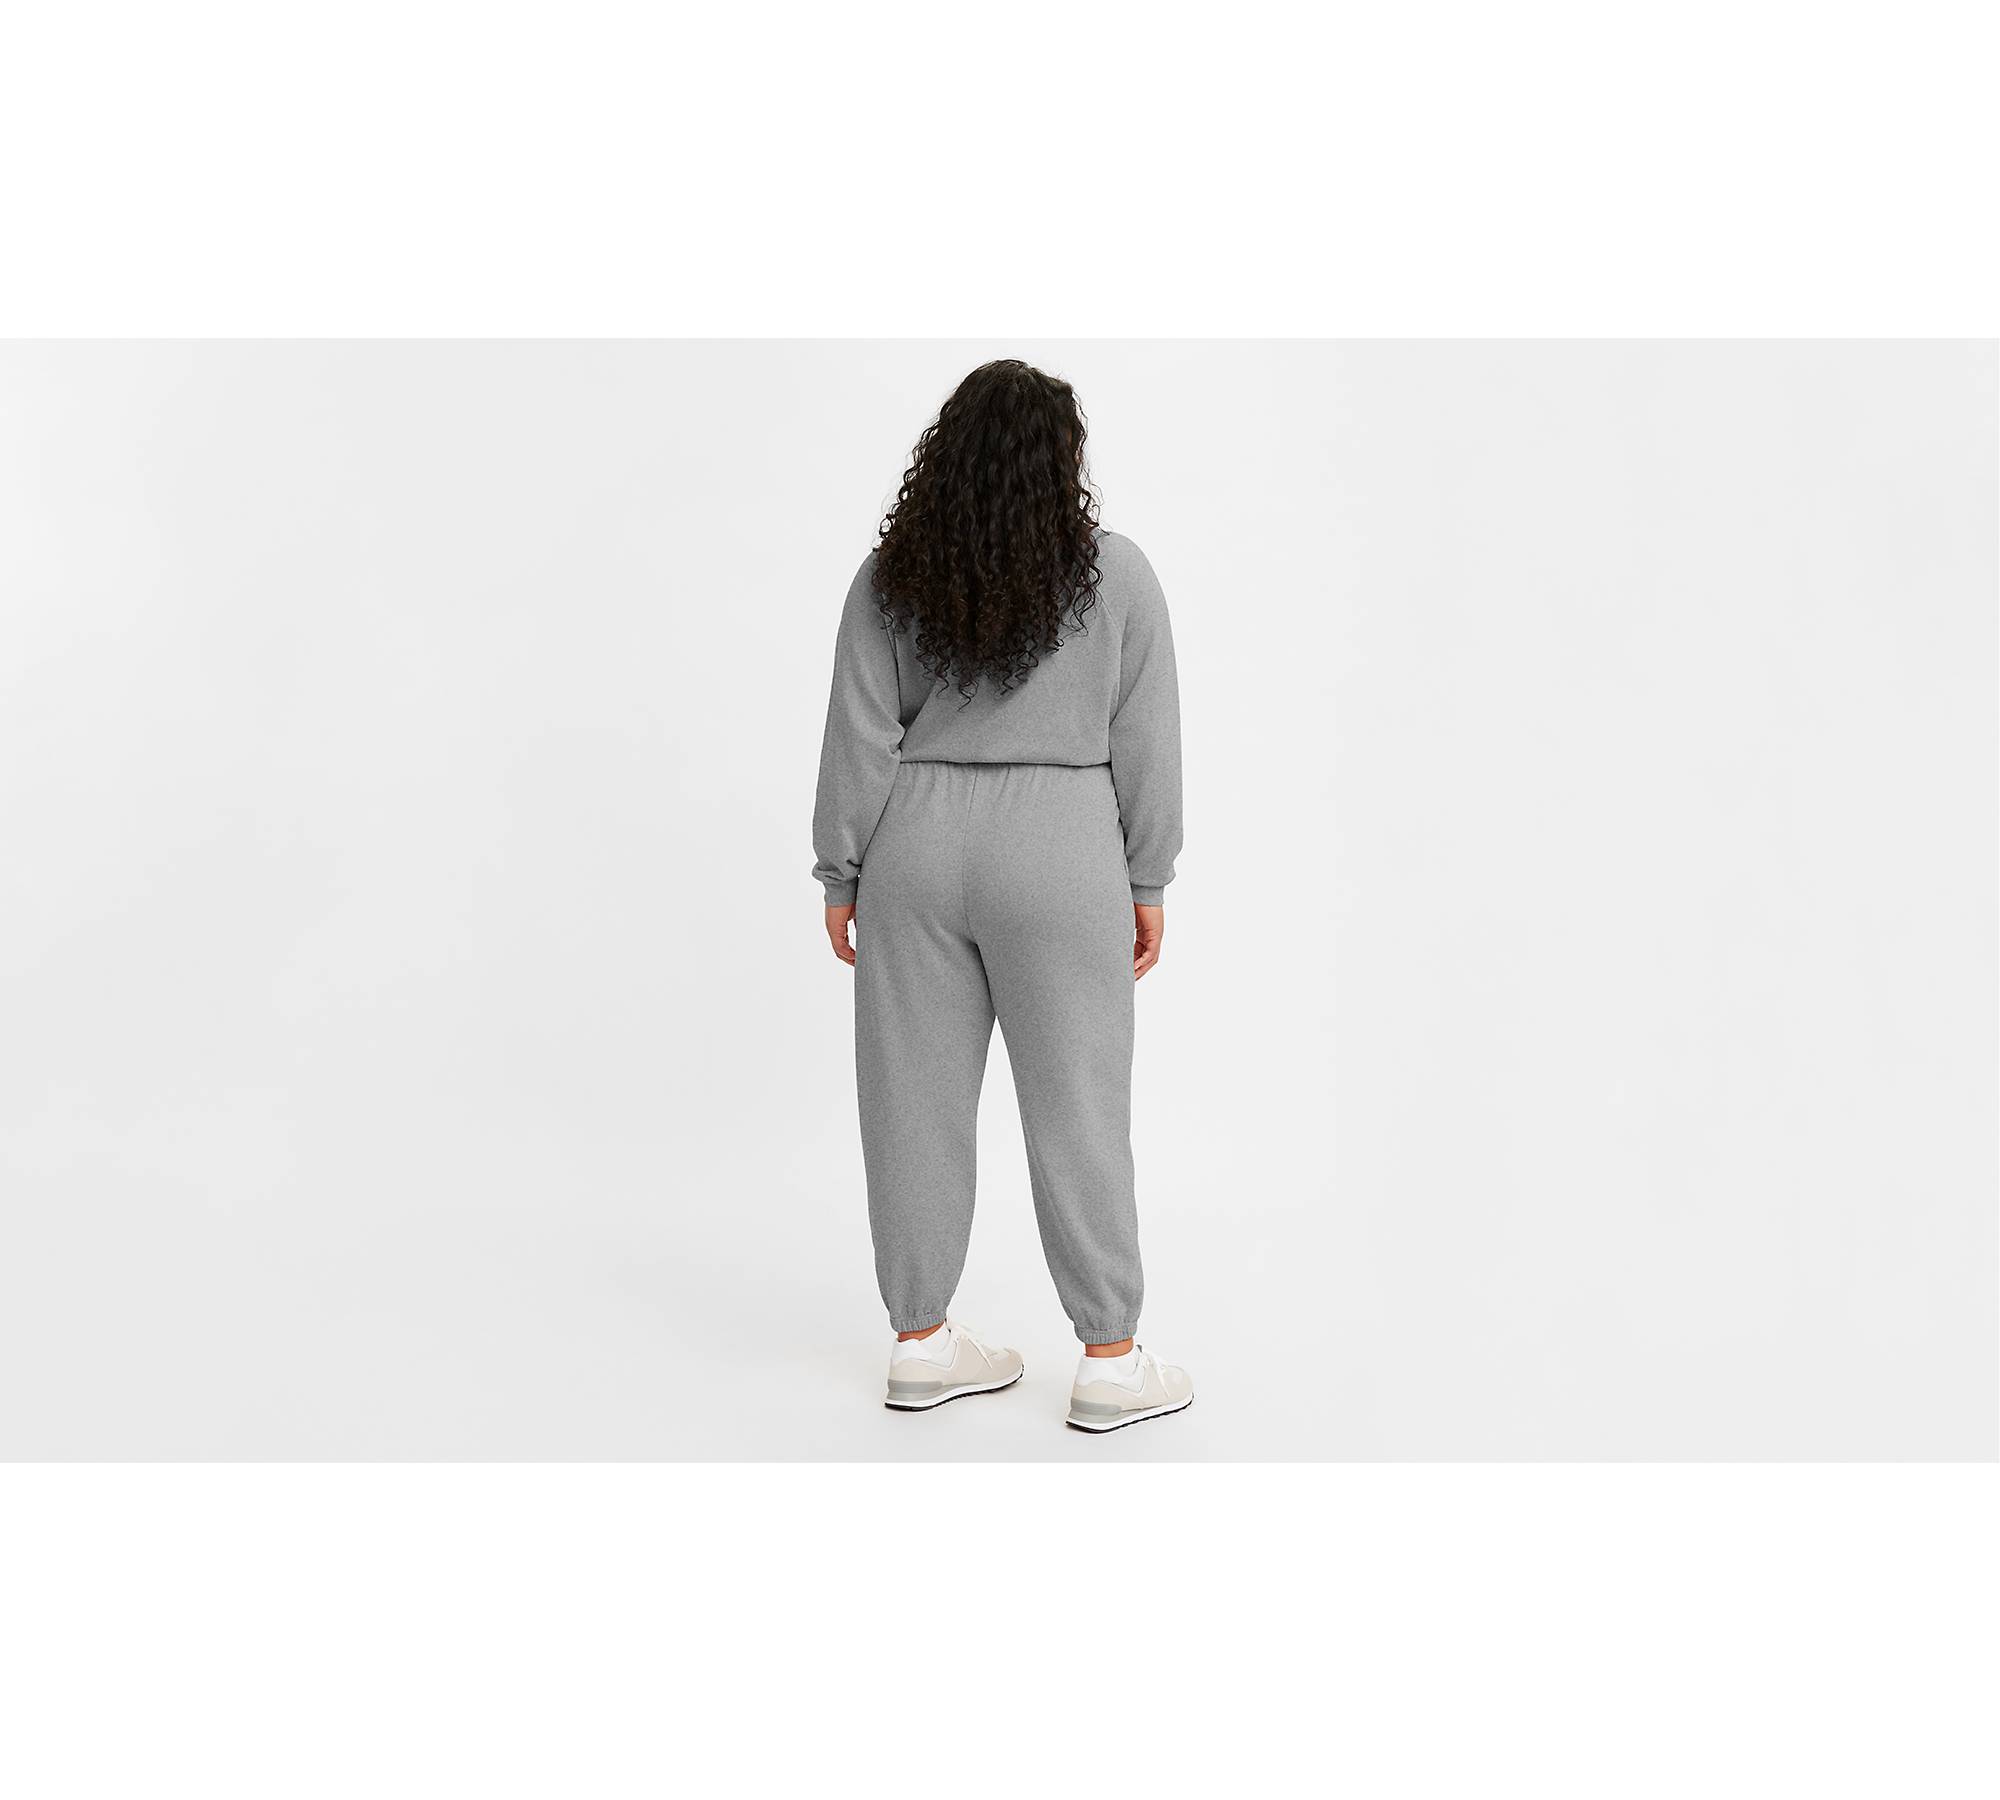 sweatpants outfit for black girl plus size｜TikTok Search